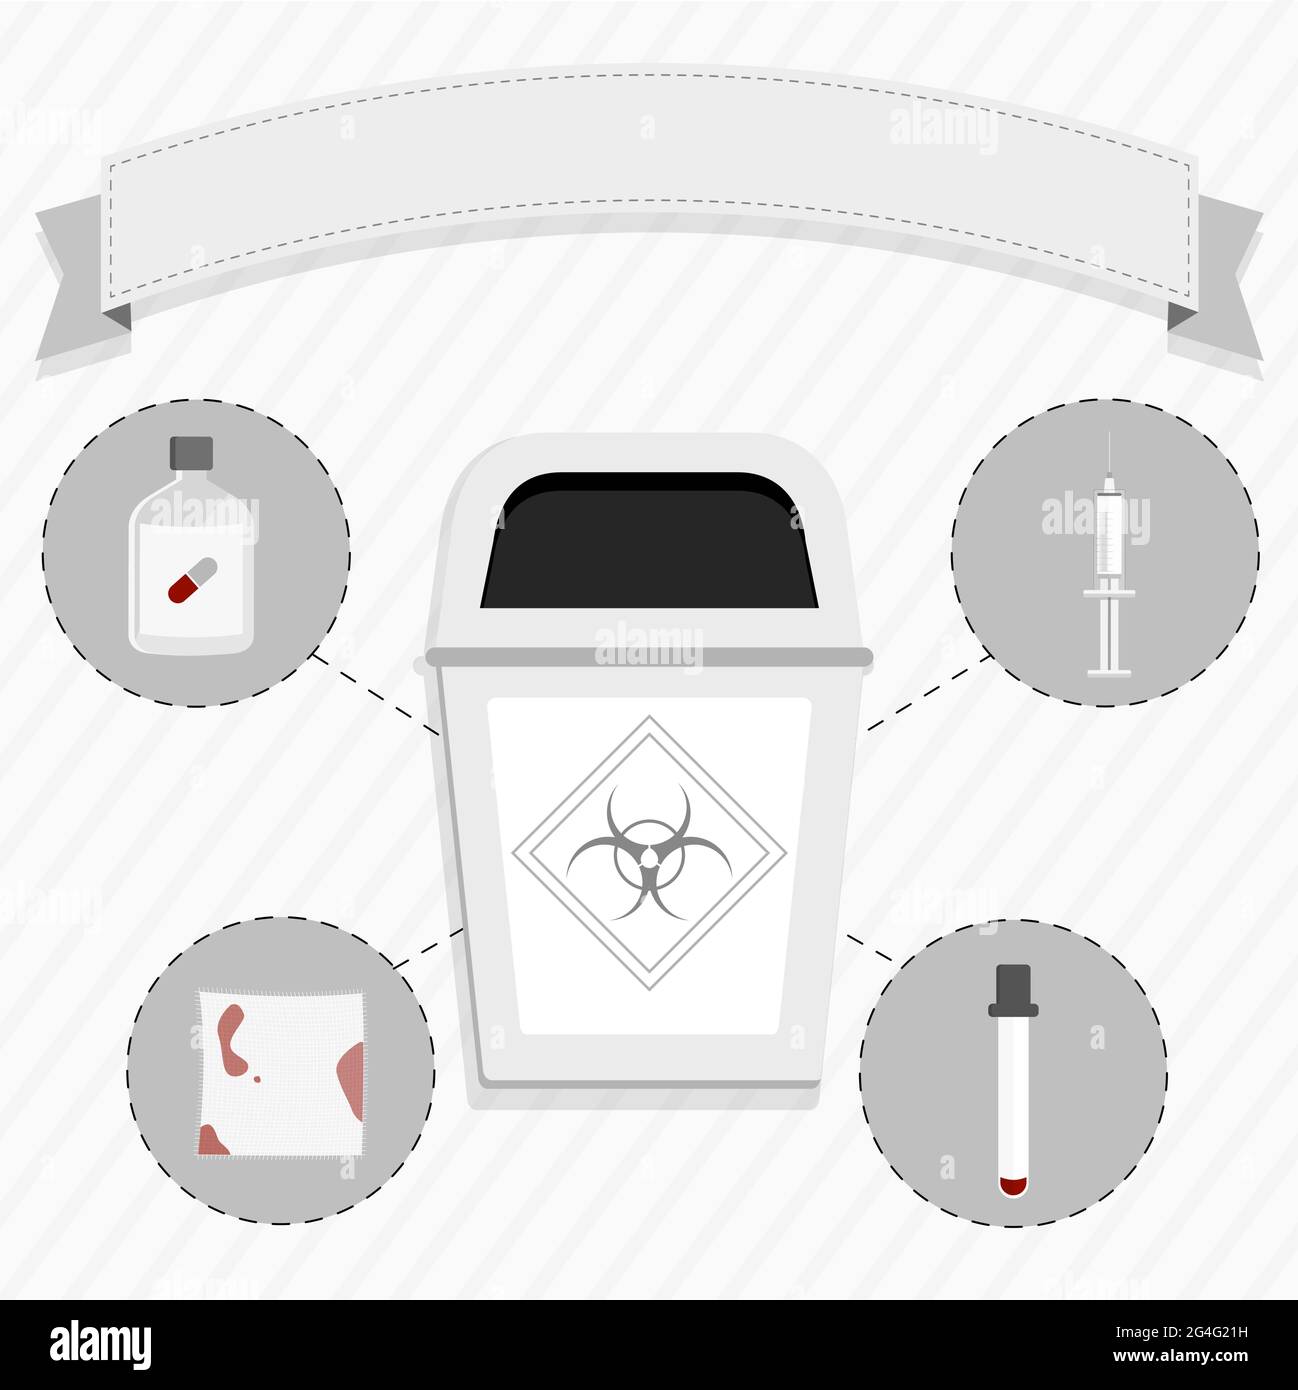 White trash for the selective collection of medical waste. Stock Vector